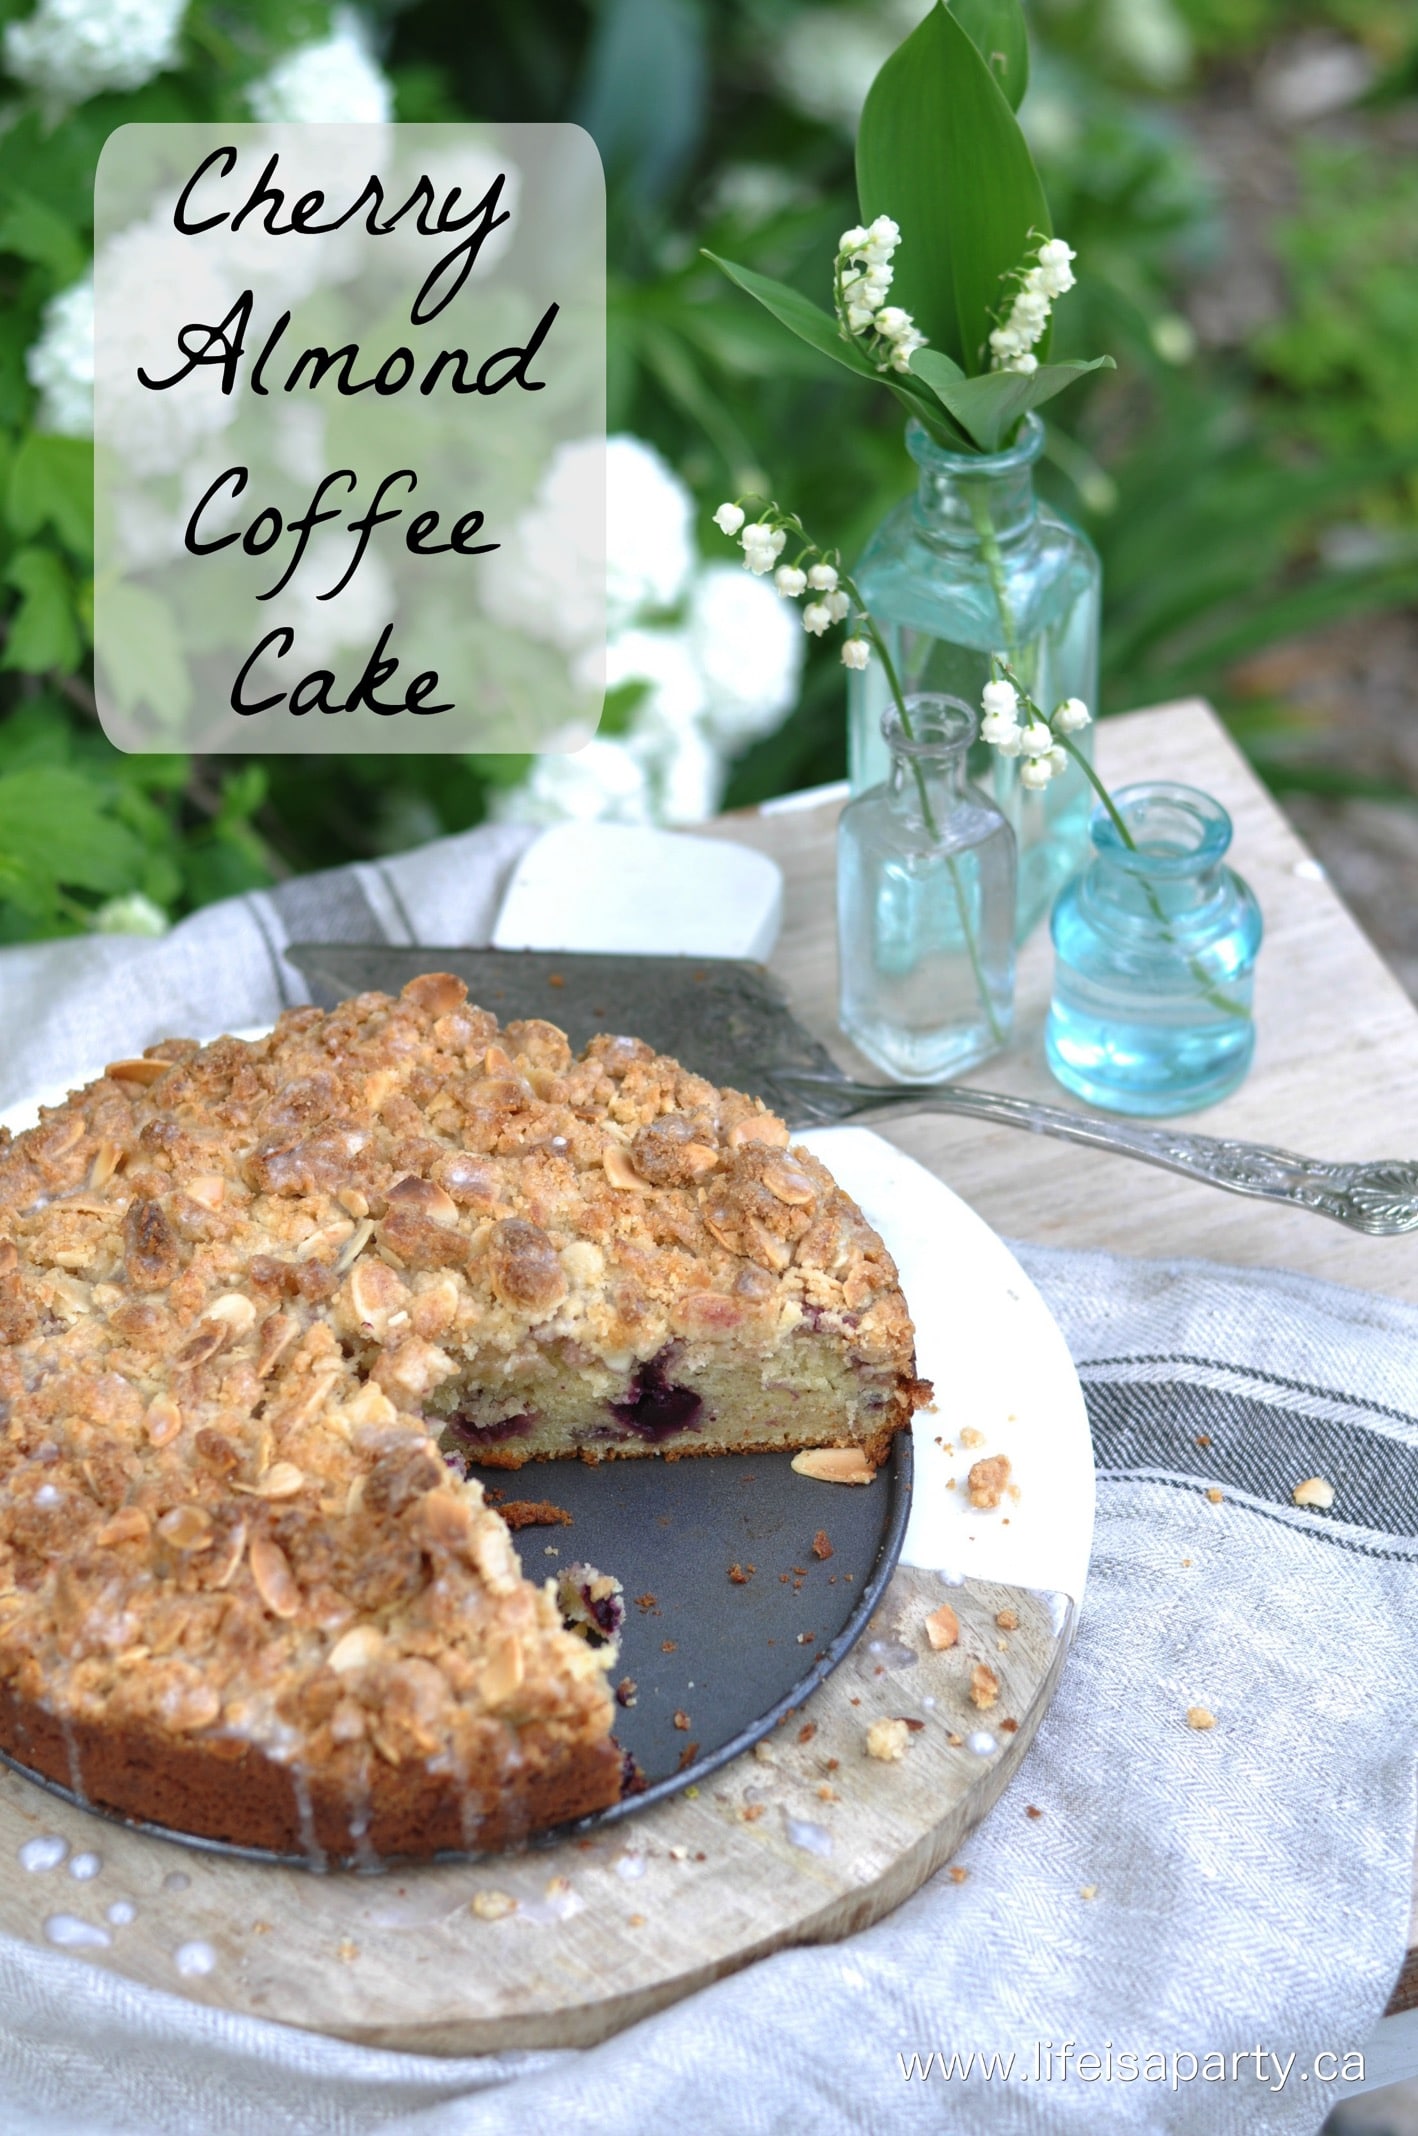 Cherry Almond Coffee Cake: I lovely not too sweet cake, with cherries, almond, and streusel topping. Made with sour cream to keep it lovely and moist.